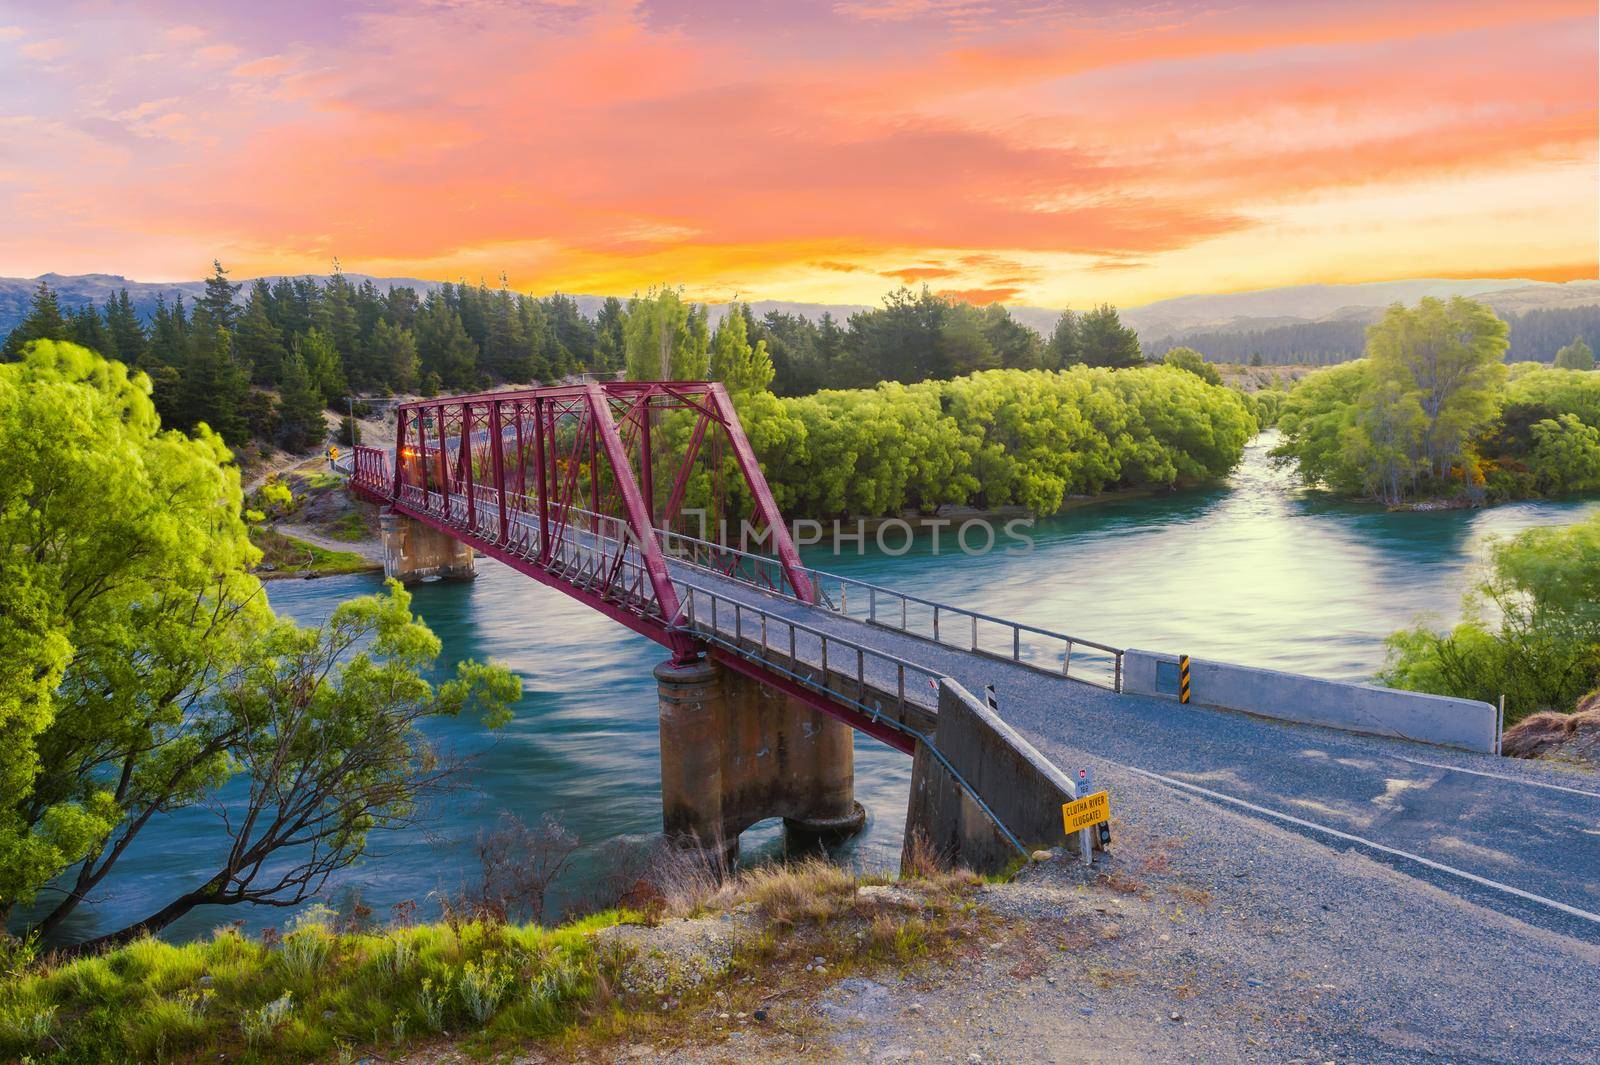 Beautiful sunset over the Clyde bridge on the river Clutha with Southern Alps peaks on the horizon, New Zealand